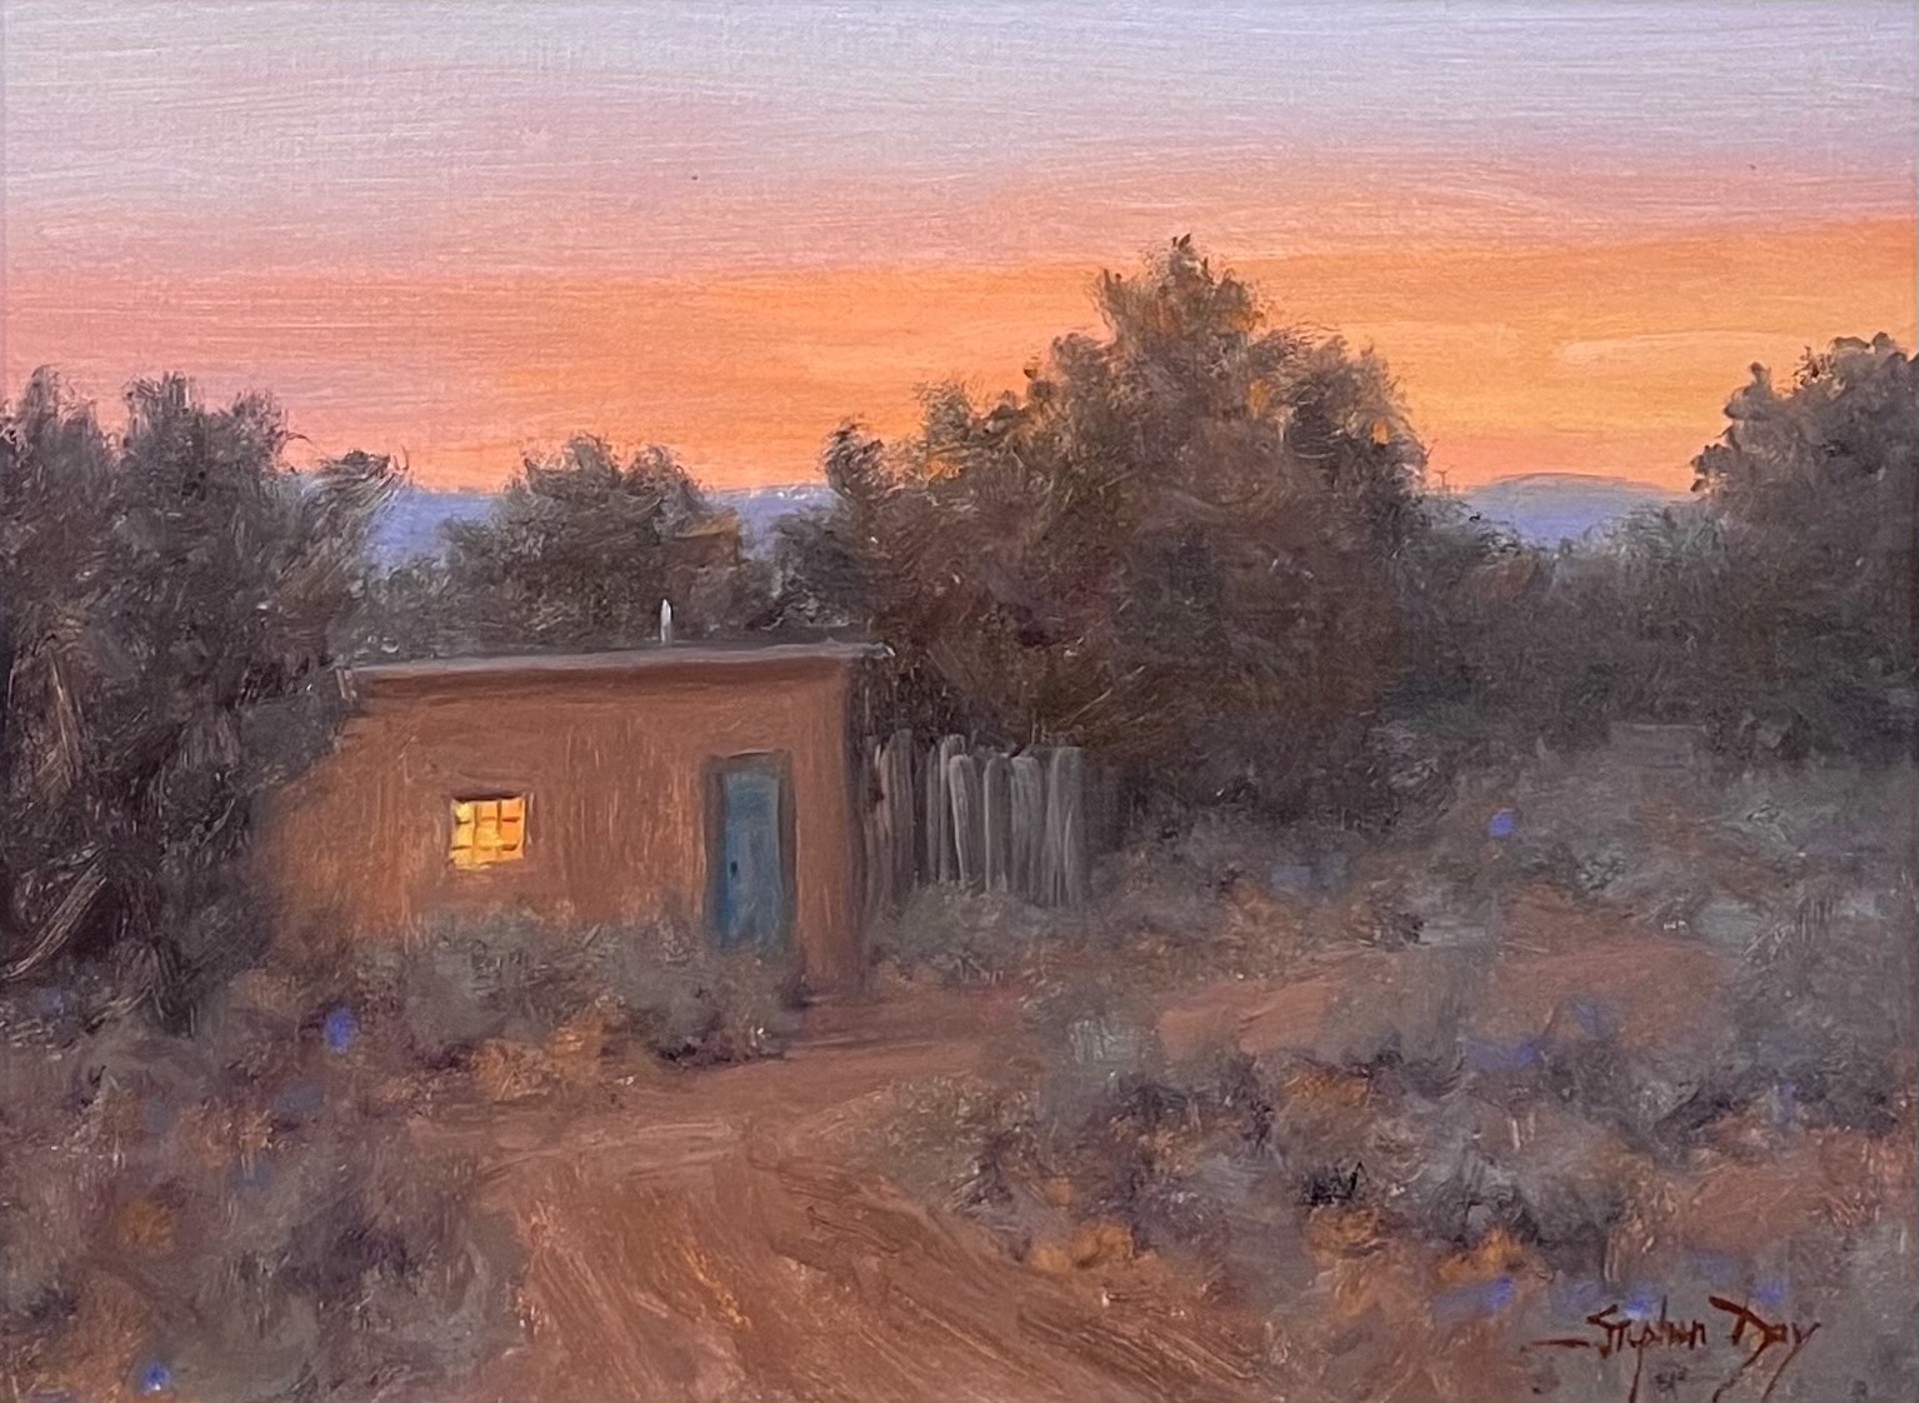 In the Evening by Stephen Day